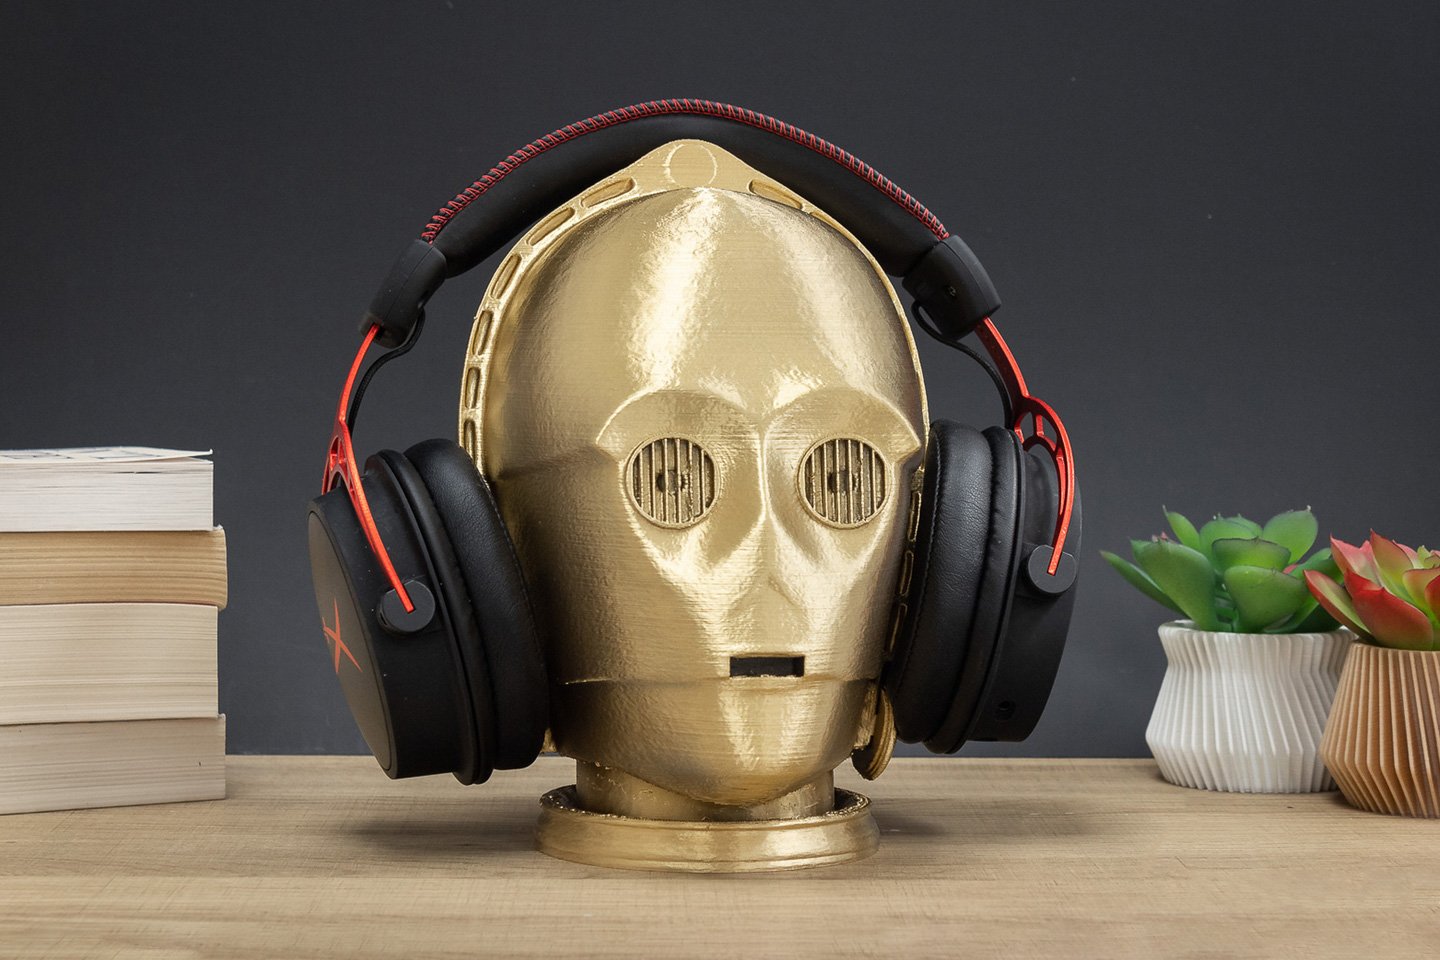 Star Wars inspired 3D-printed headphone stands are the perfect accessory to celebrate May the 4th!